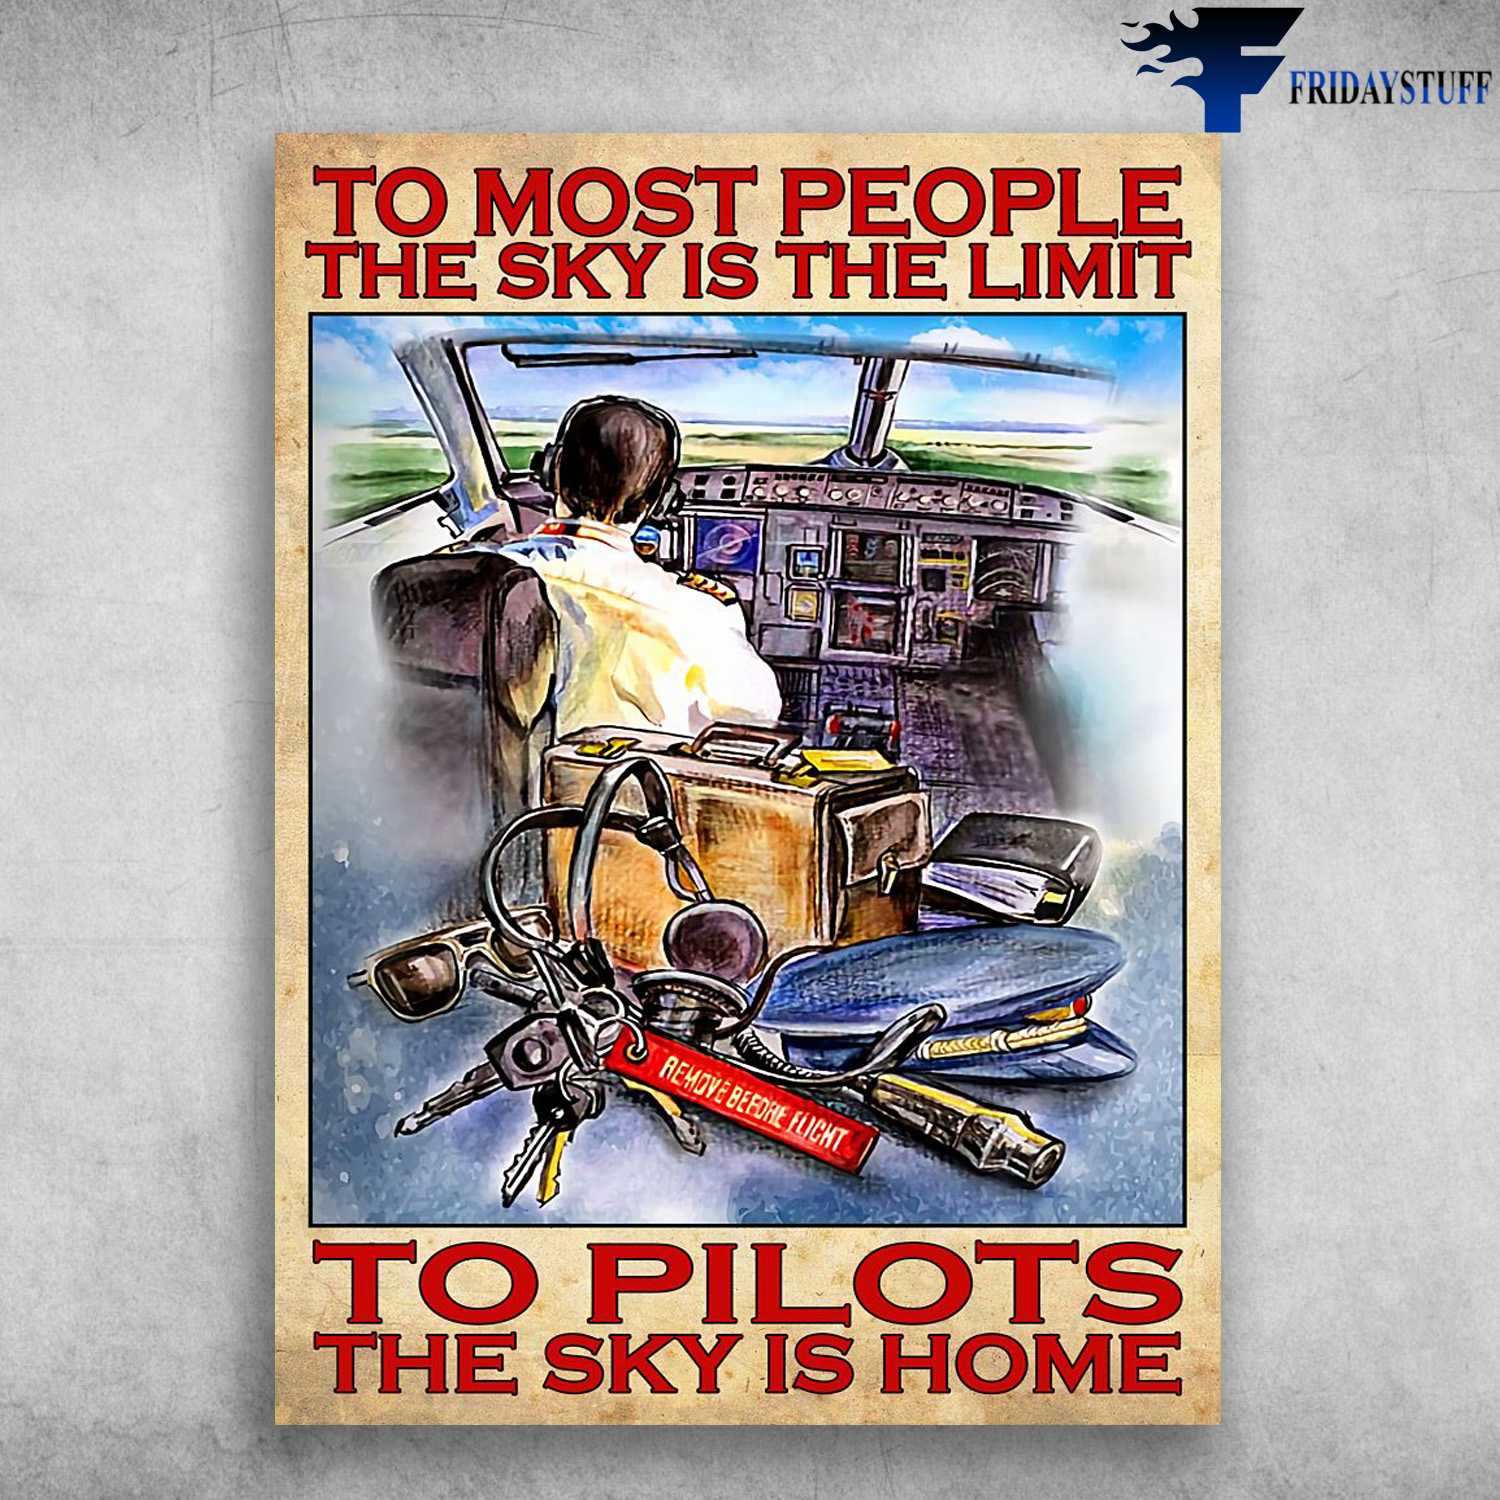 Pilot Poster - To Most People, The Sky Is The Limis To Pilots, The Sky Is Home